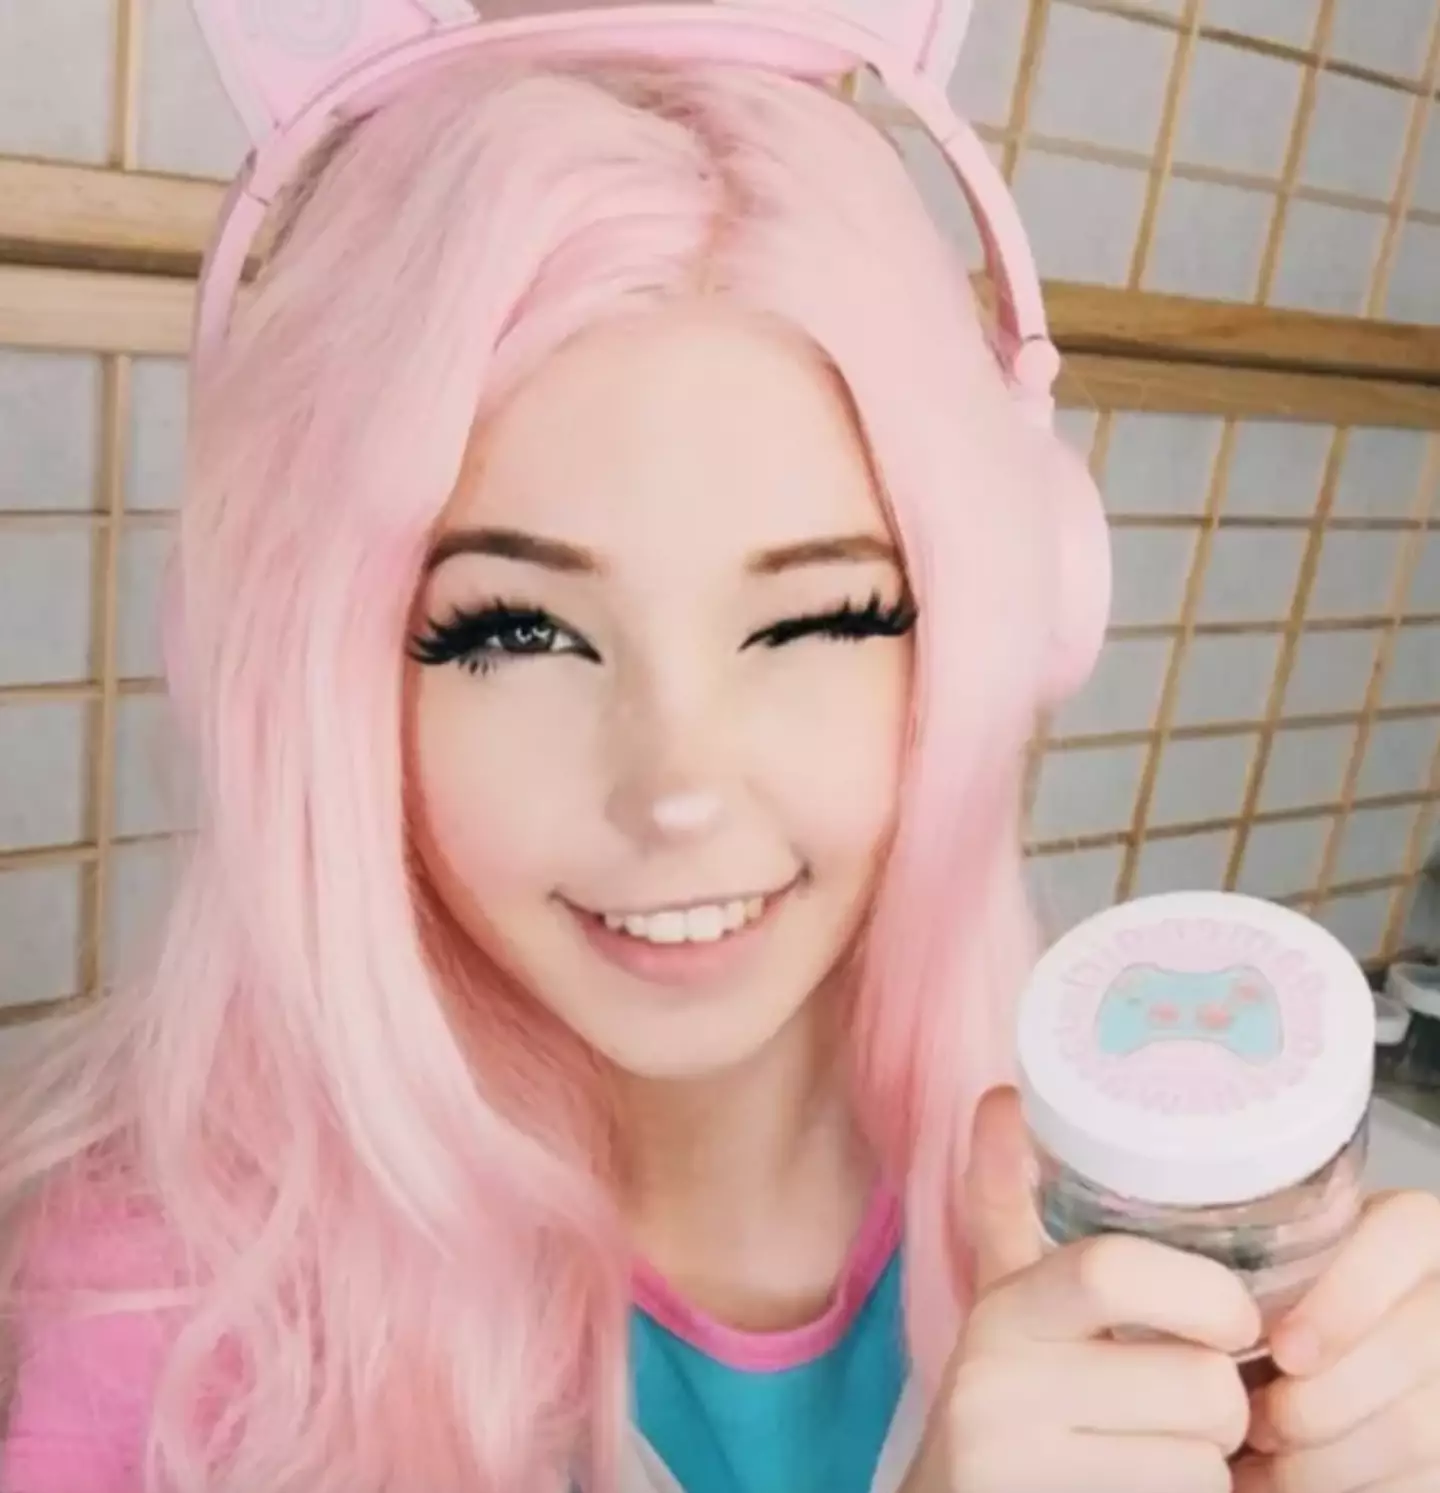 OnlyFans star Belle Delphine began to sell her bathwater in 2019.